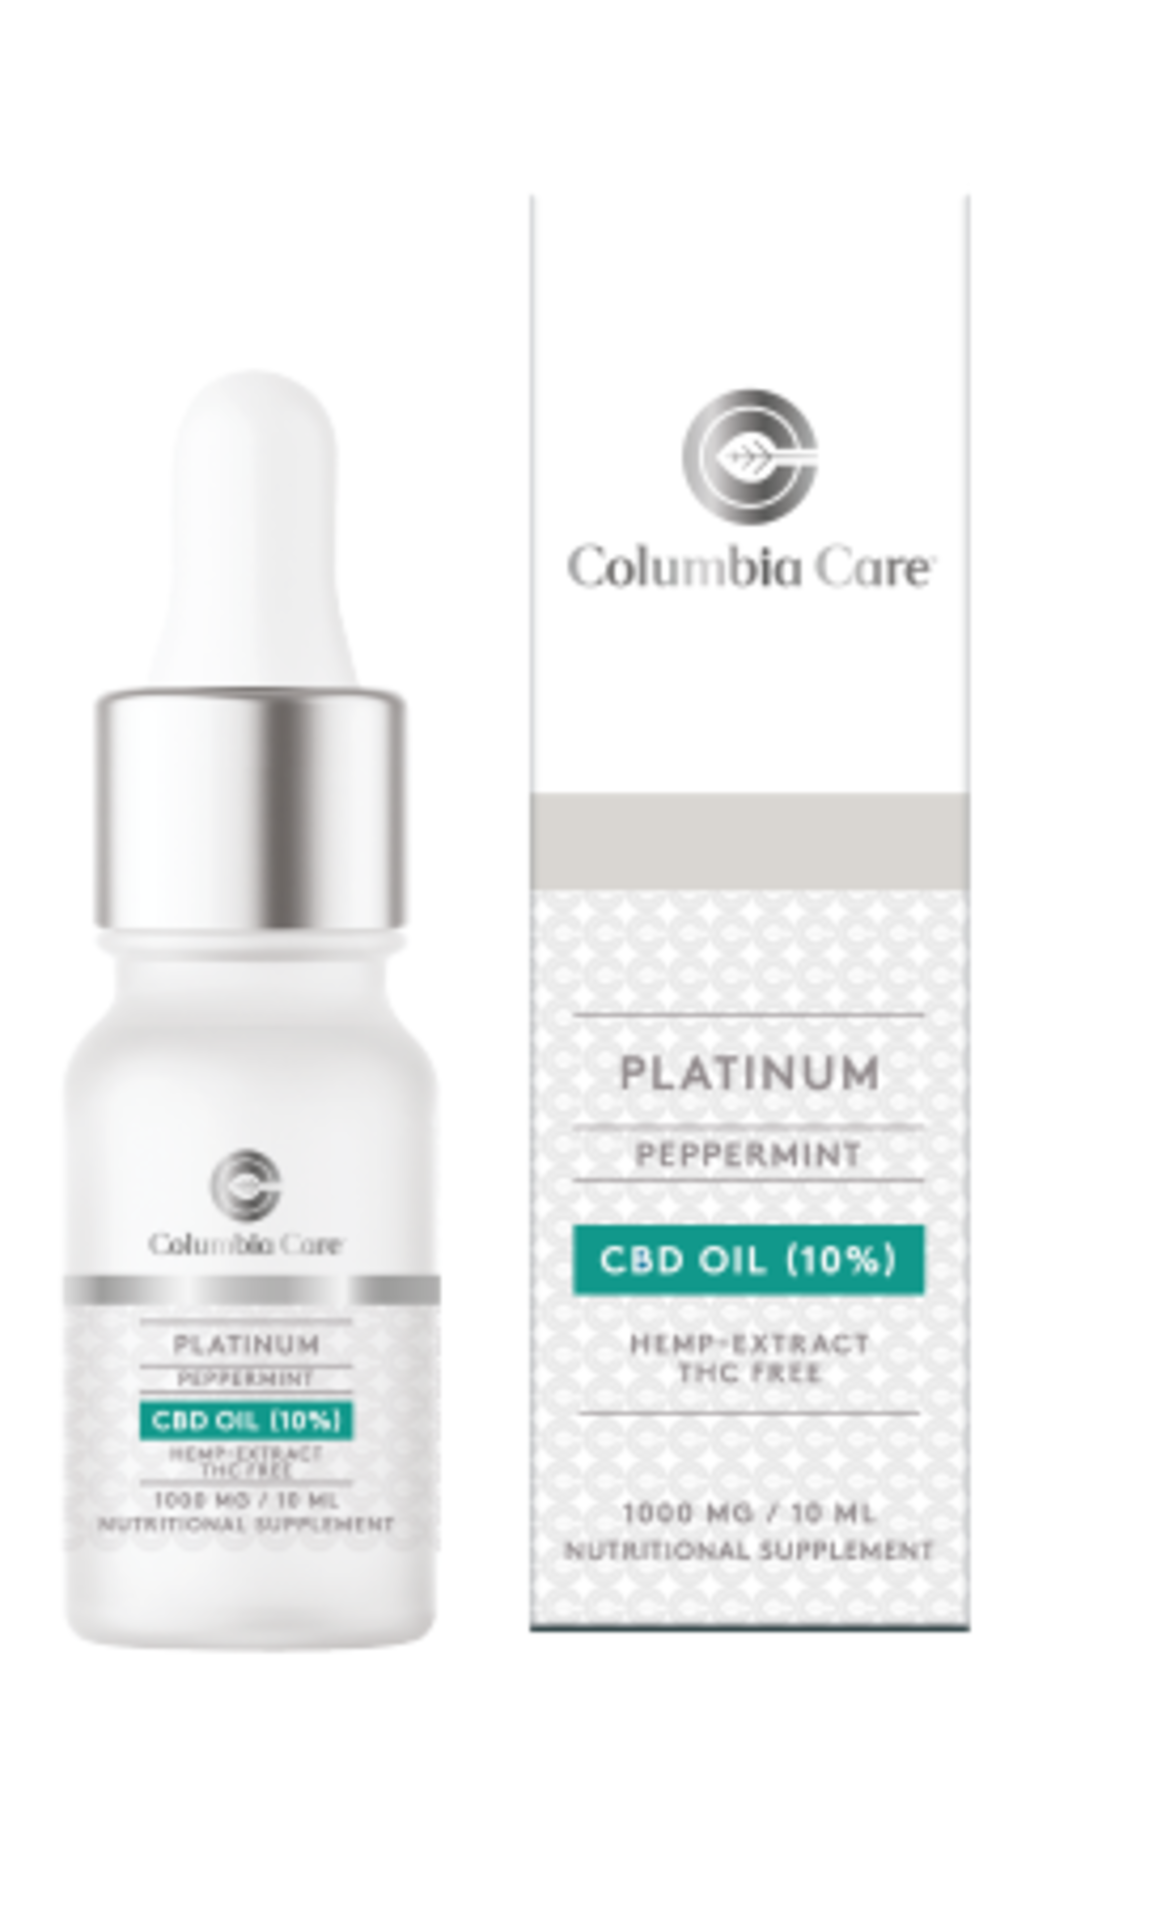 Brand New Columbia Care Platinum Peppermint Flavored Tincture 10ml 1000mg. Columbia Care, a